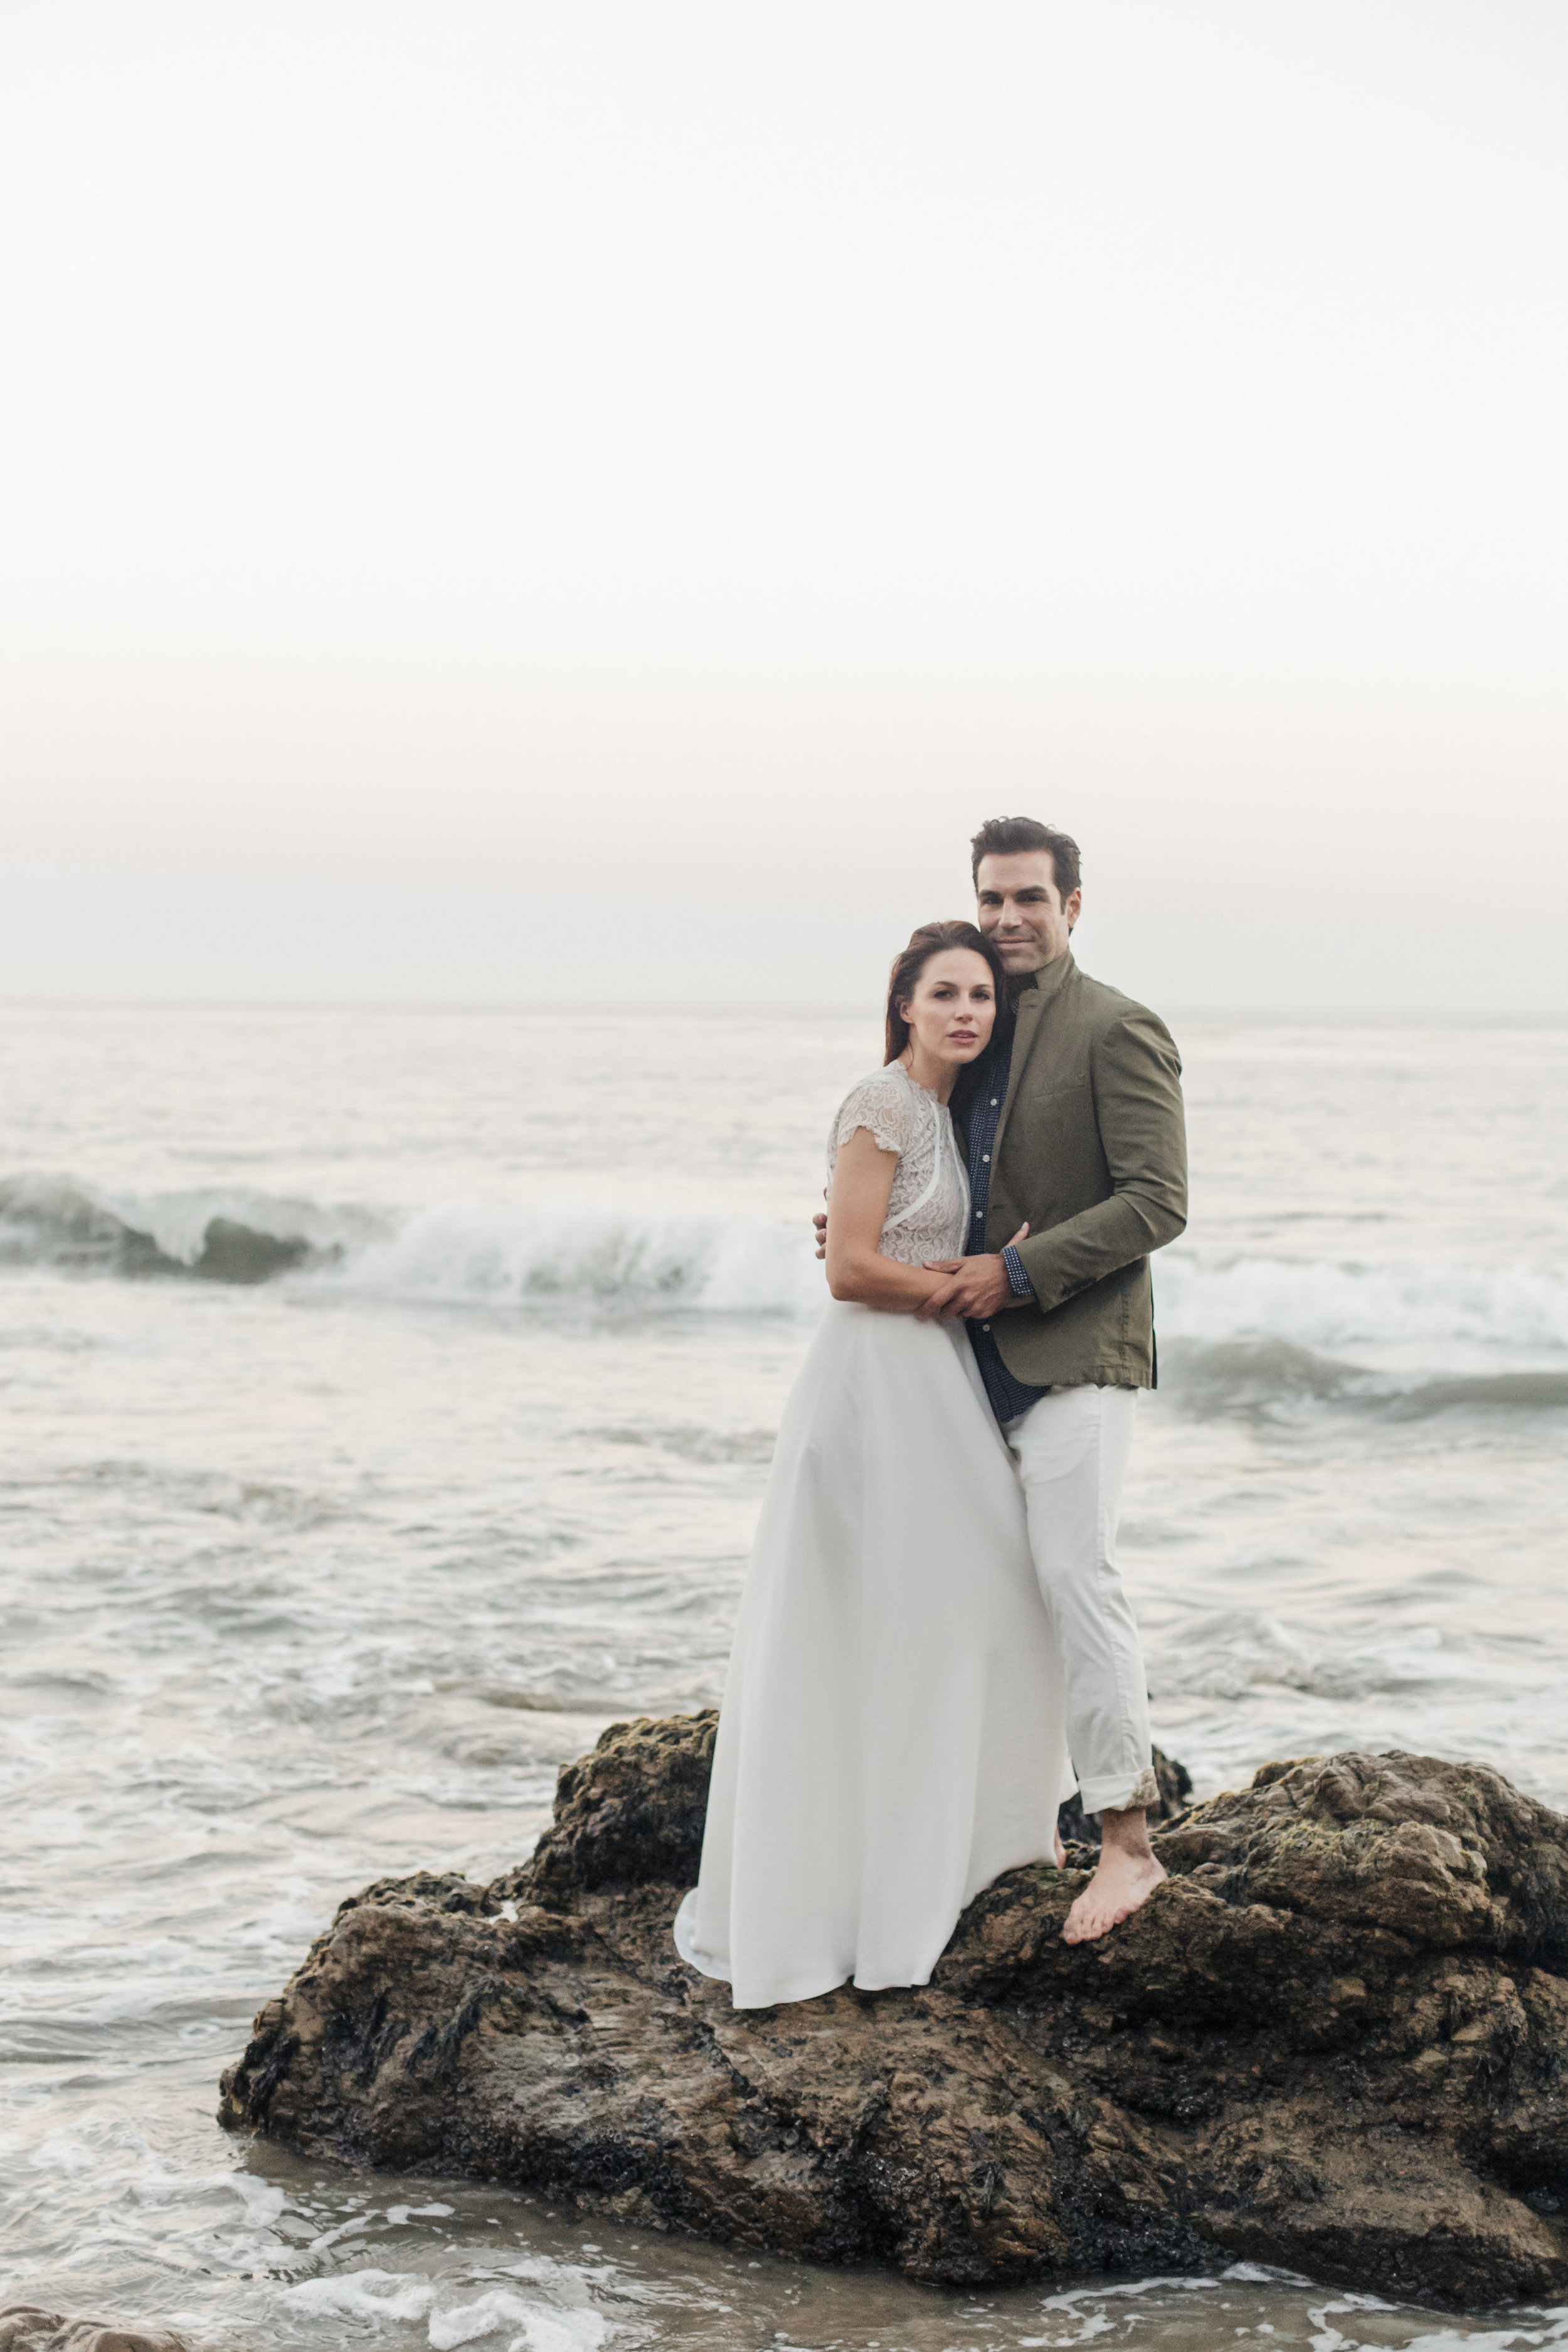 5 Year Anniversary Shoot - That Cozy Life - Image by Molly + Co. 